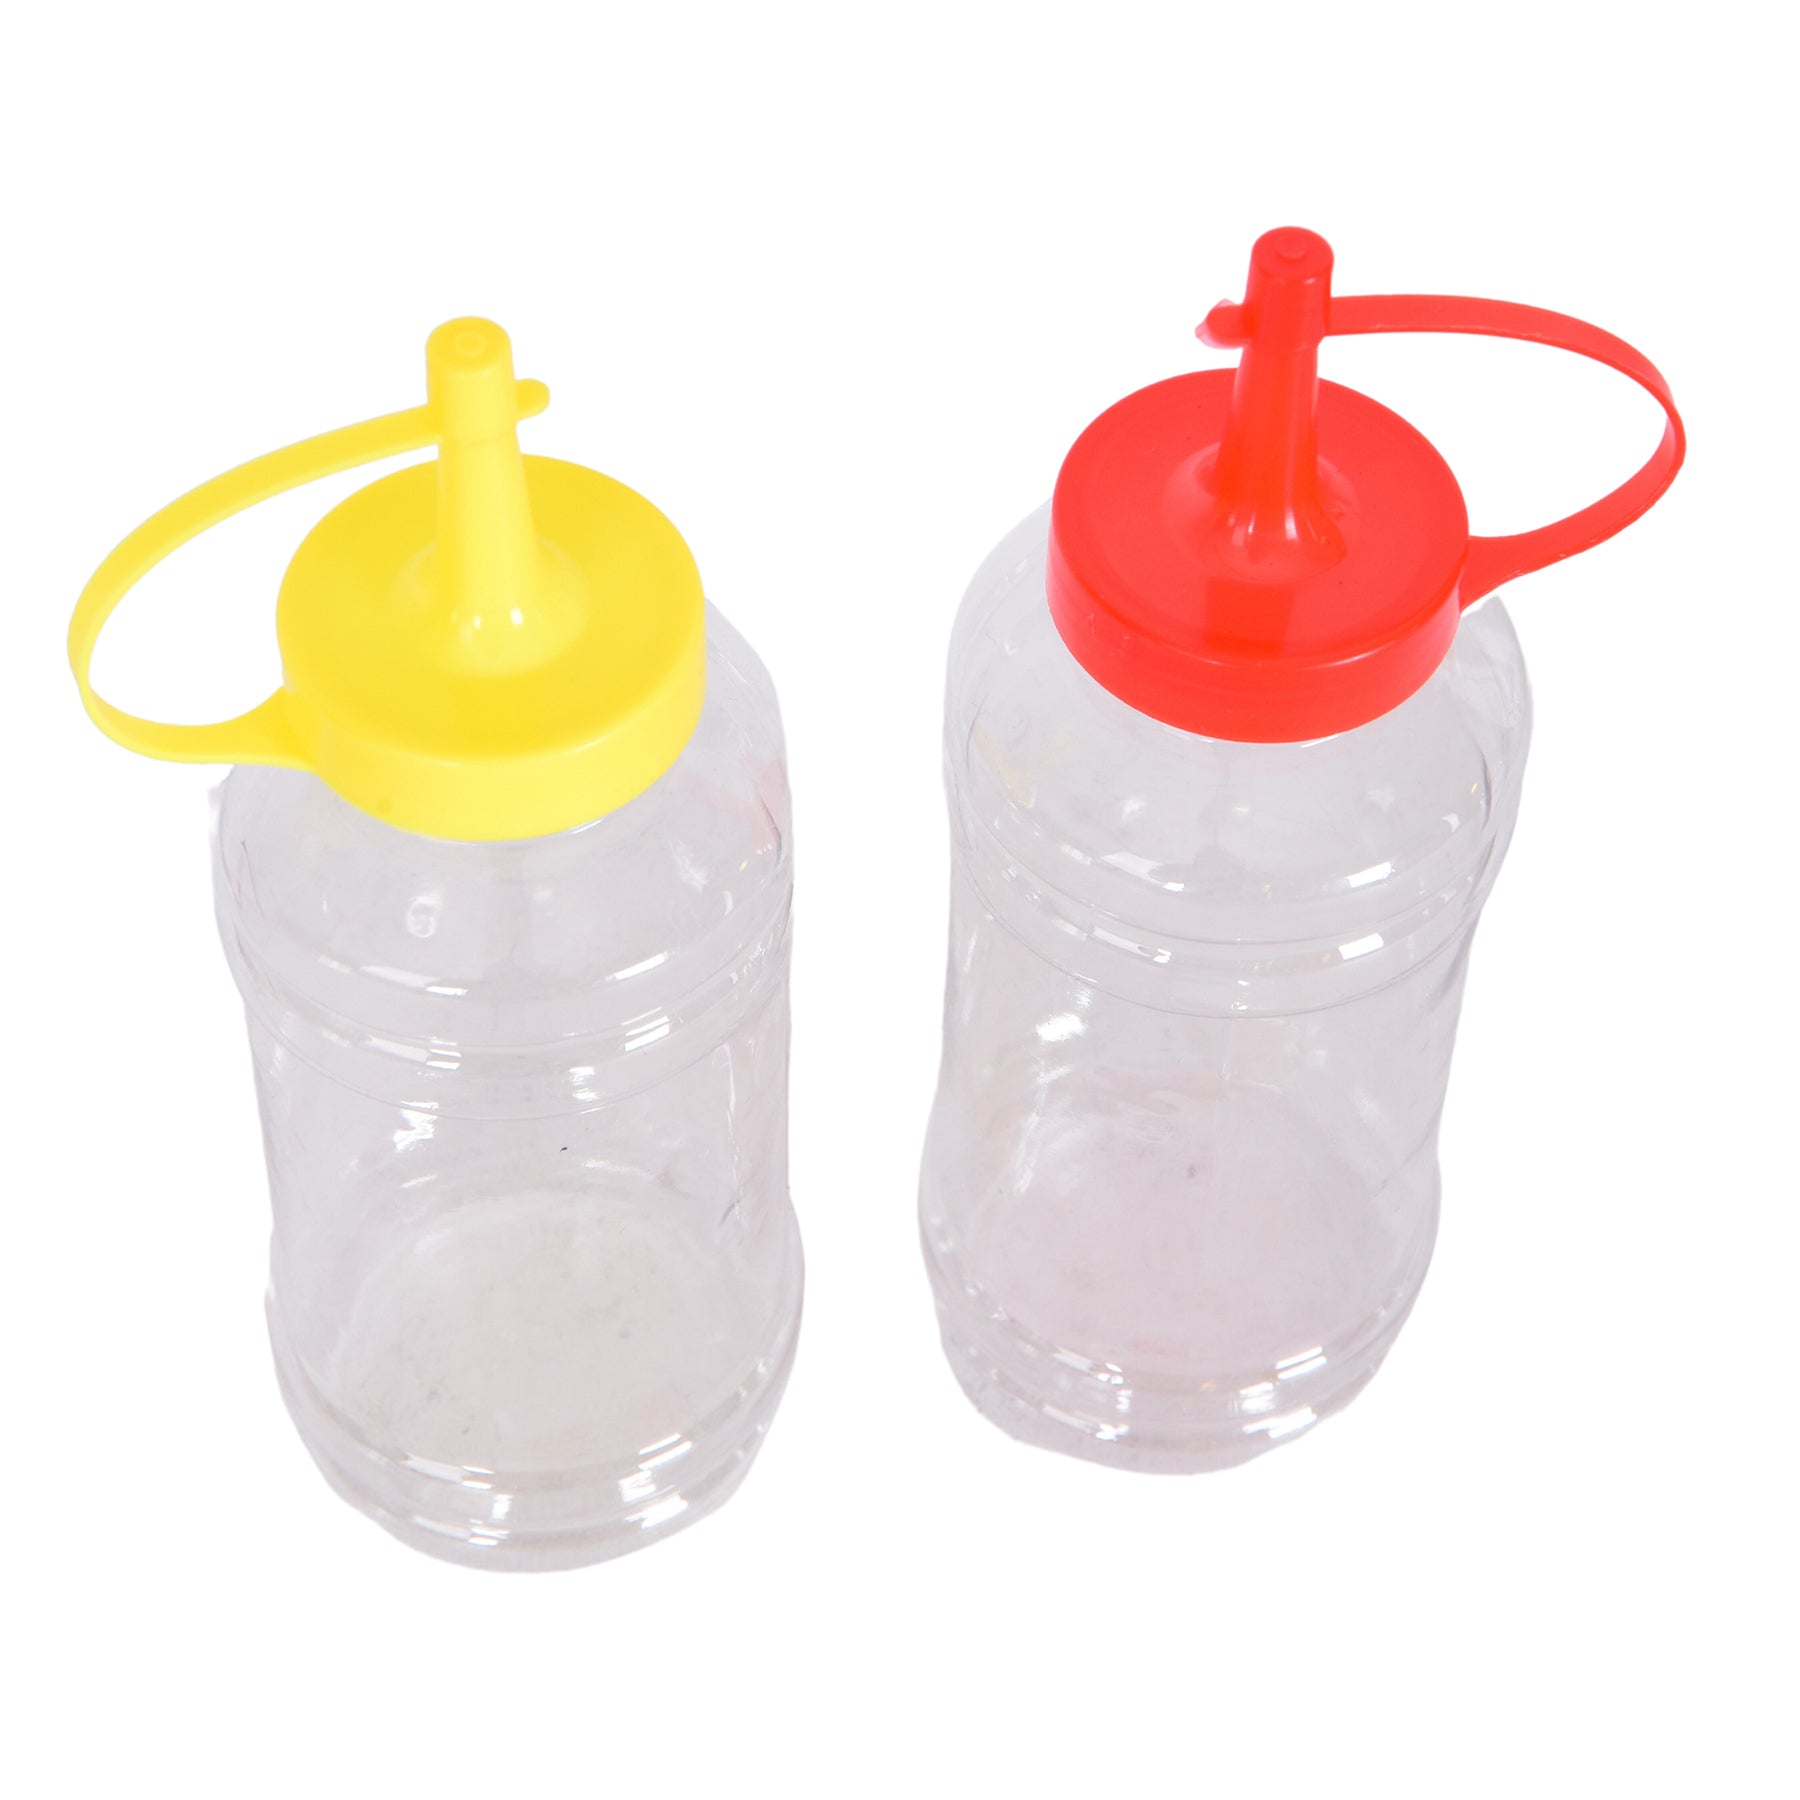 2 pcs Ketchup dispenser - Yellow & Red Color